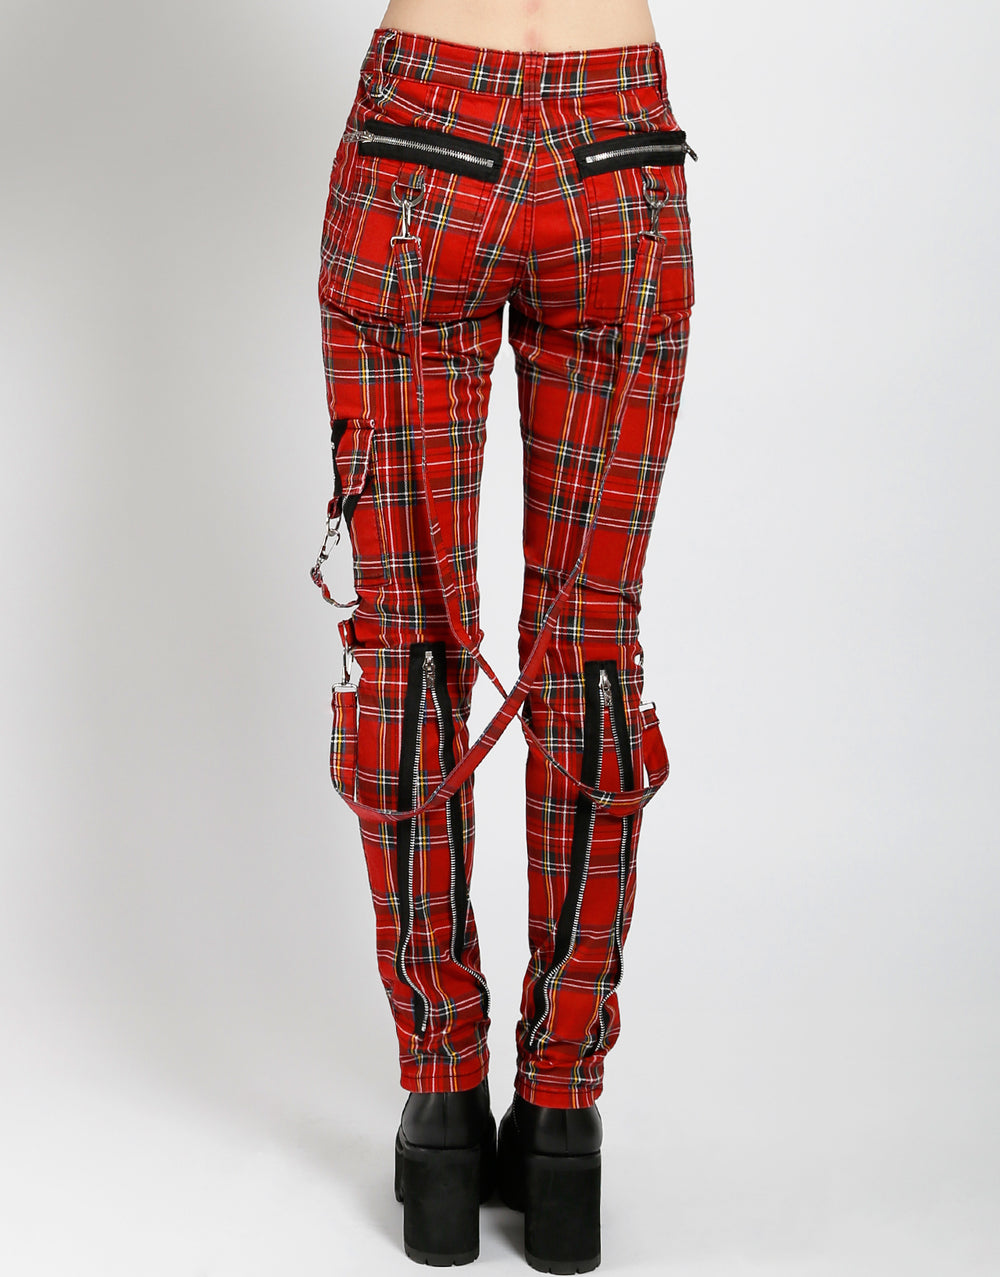 Red Plaid Pants Wedge Sneakers  The Hunter Collector